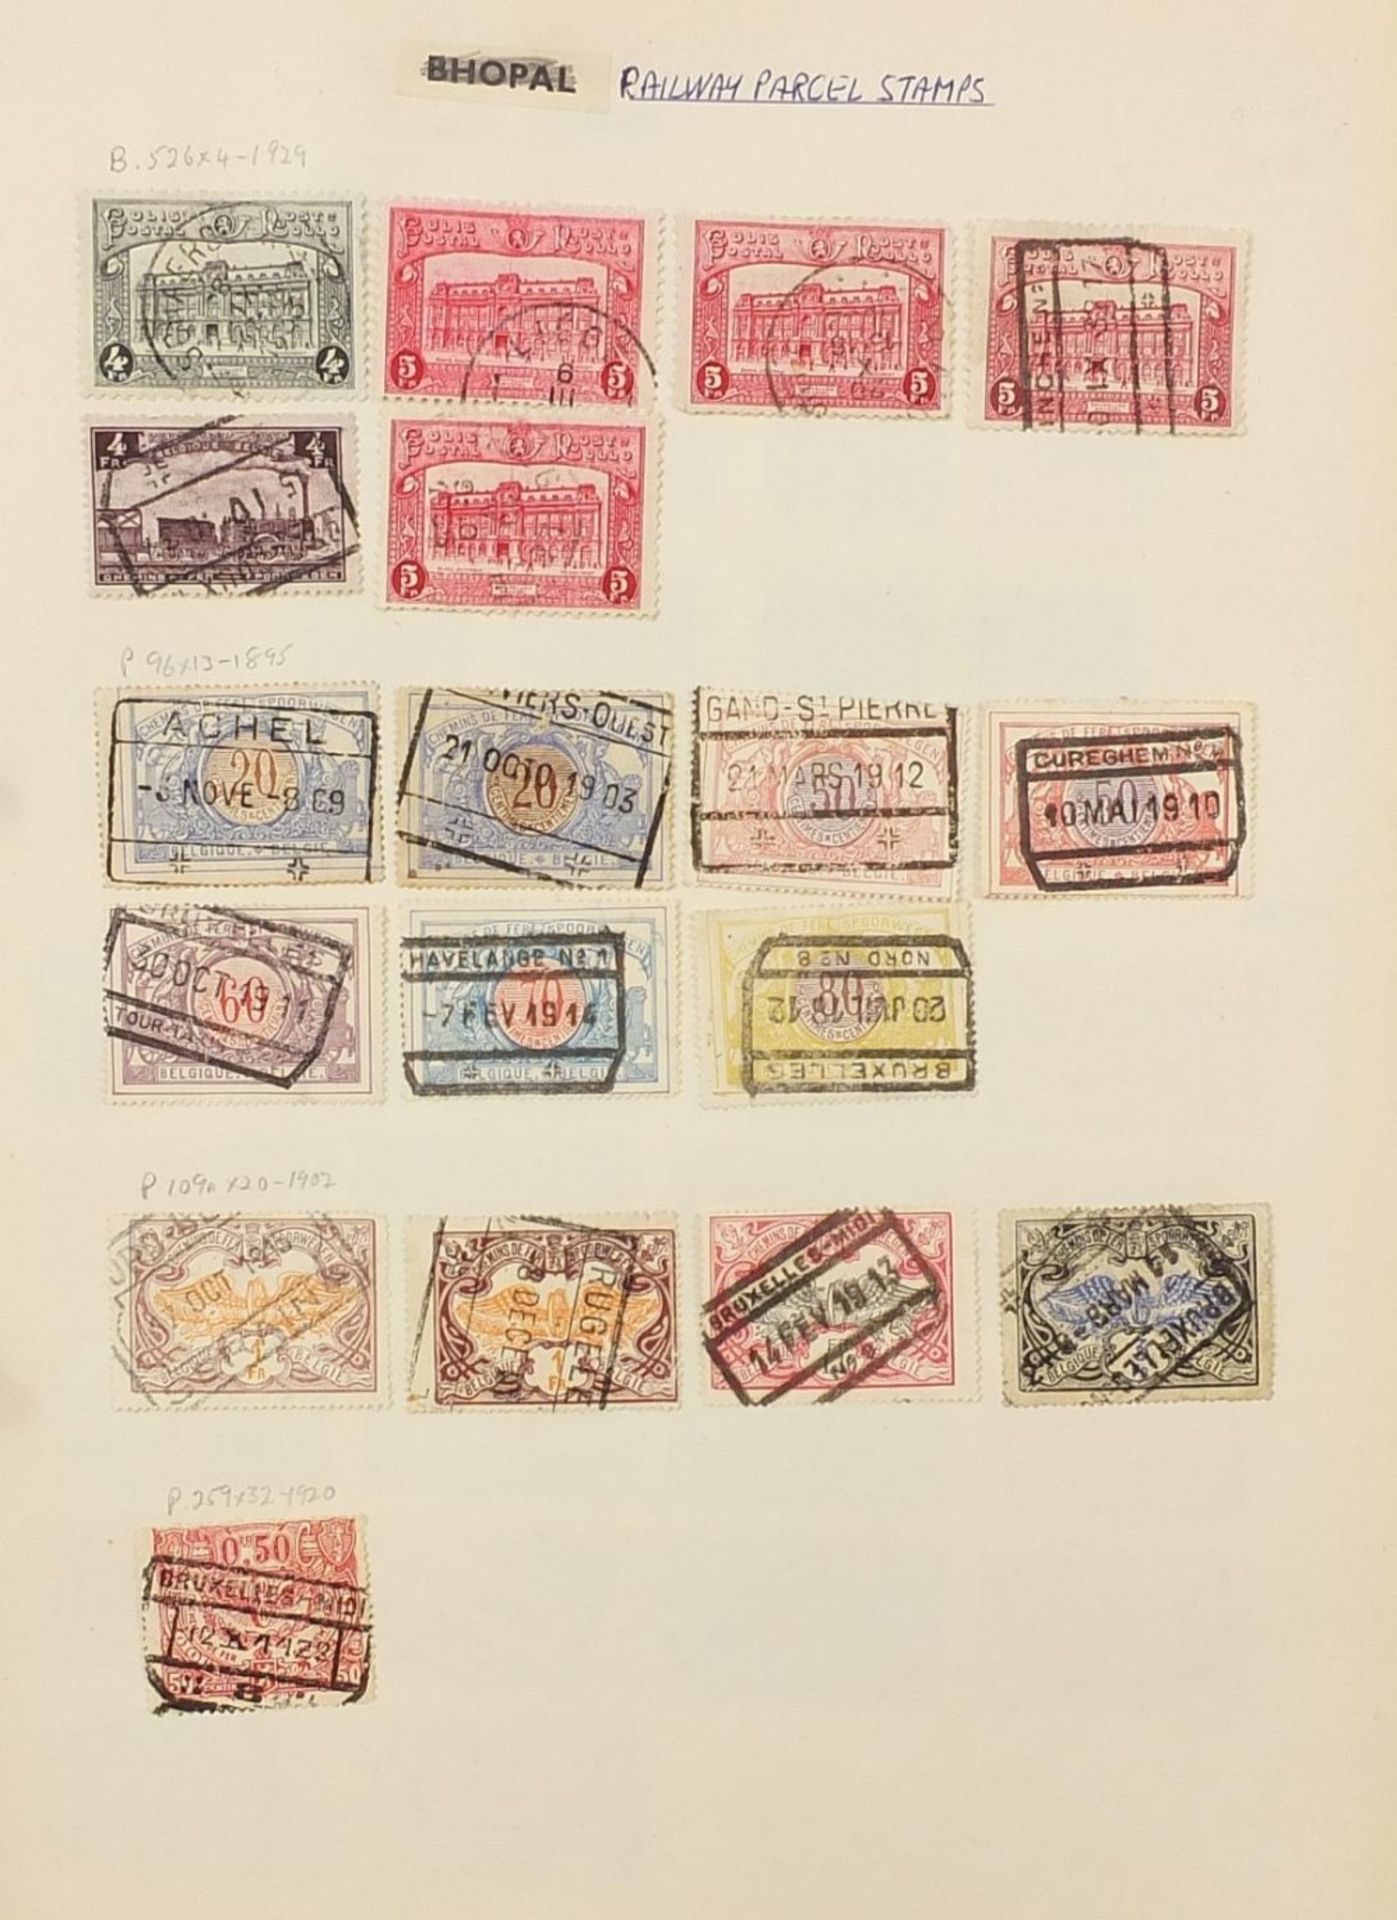 Extensive collection of antique and later world stamps arranged in albums including Brazil, - Image 44 of 52